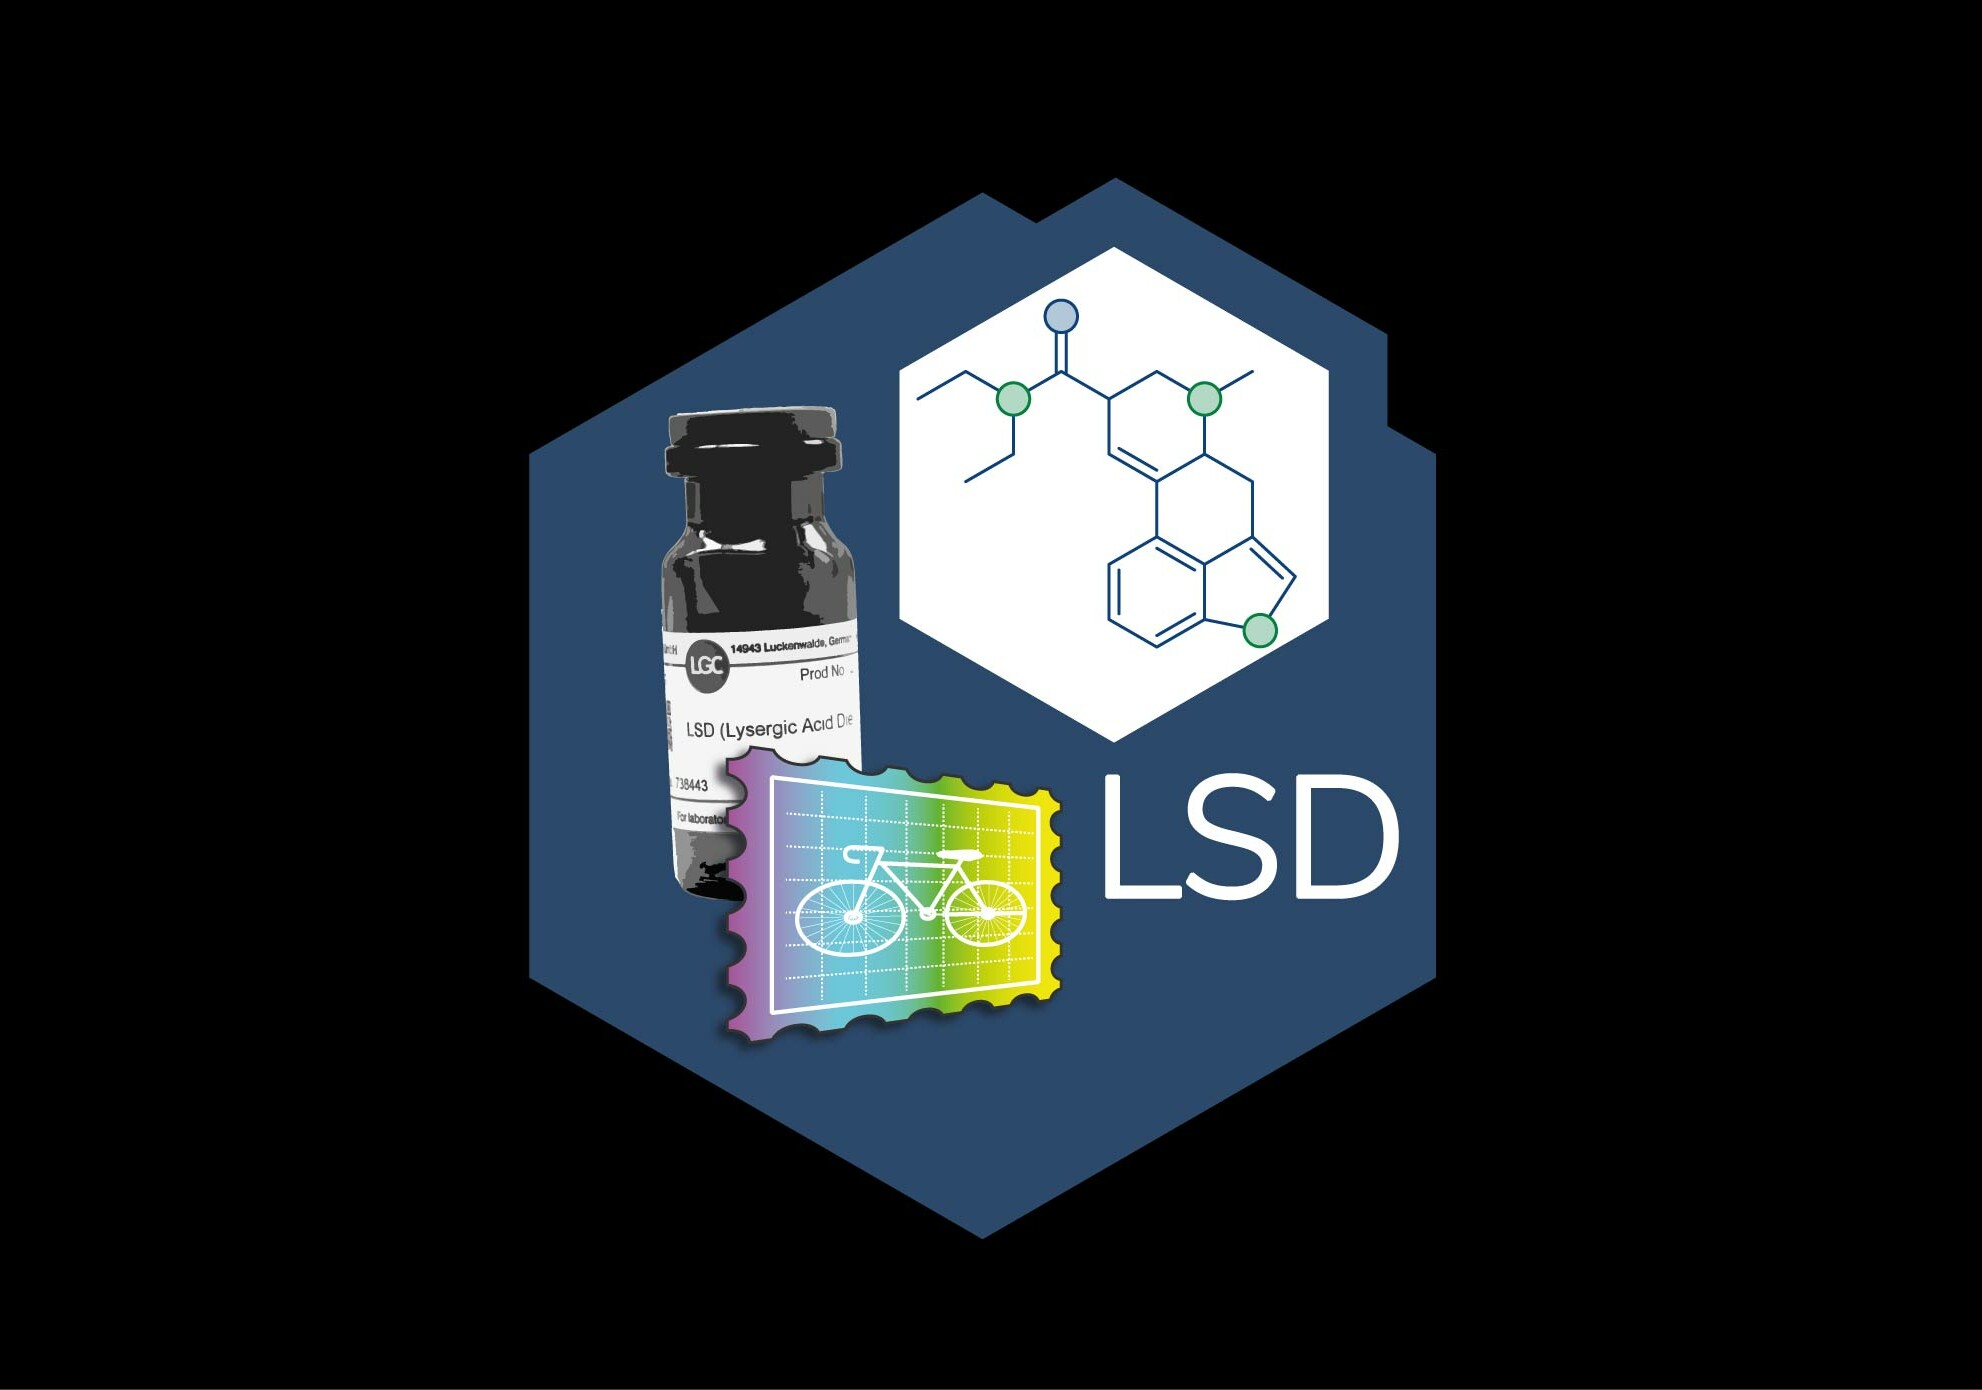 The Science of LSD